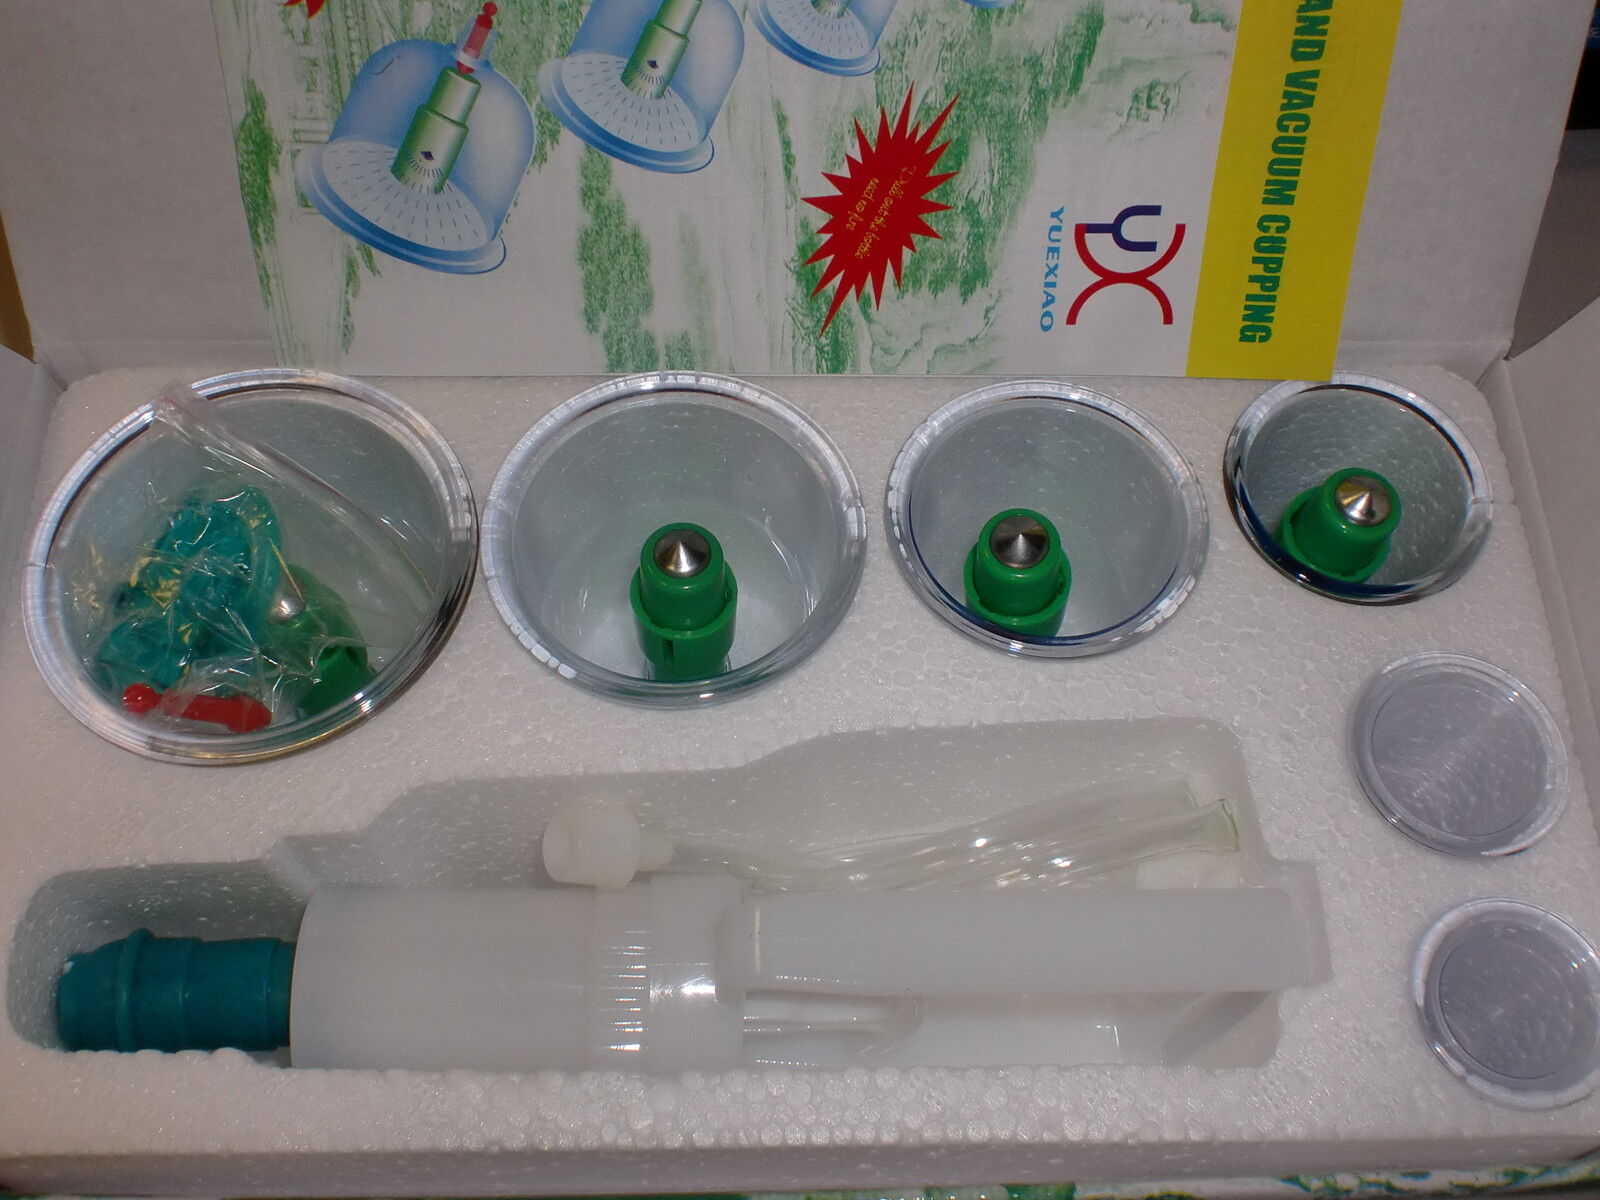 NEW WHOLESALE 50 SETS, HIGH QUALITY 6 CUPS & PUMP VACUUM CUPPING HIJAMA CHINESE Populaire verkoop, origineel